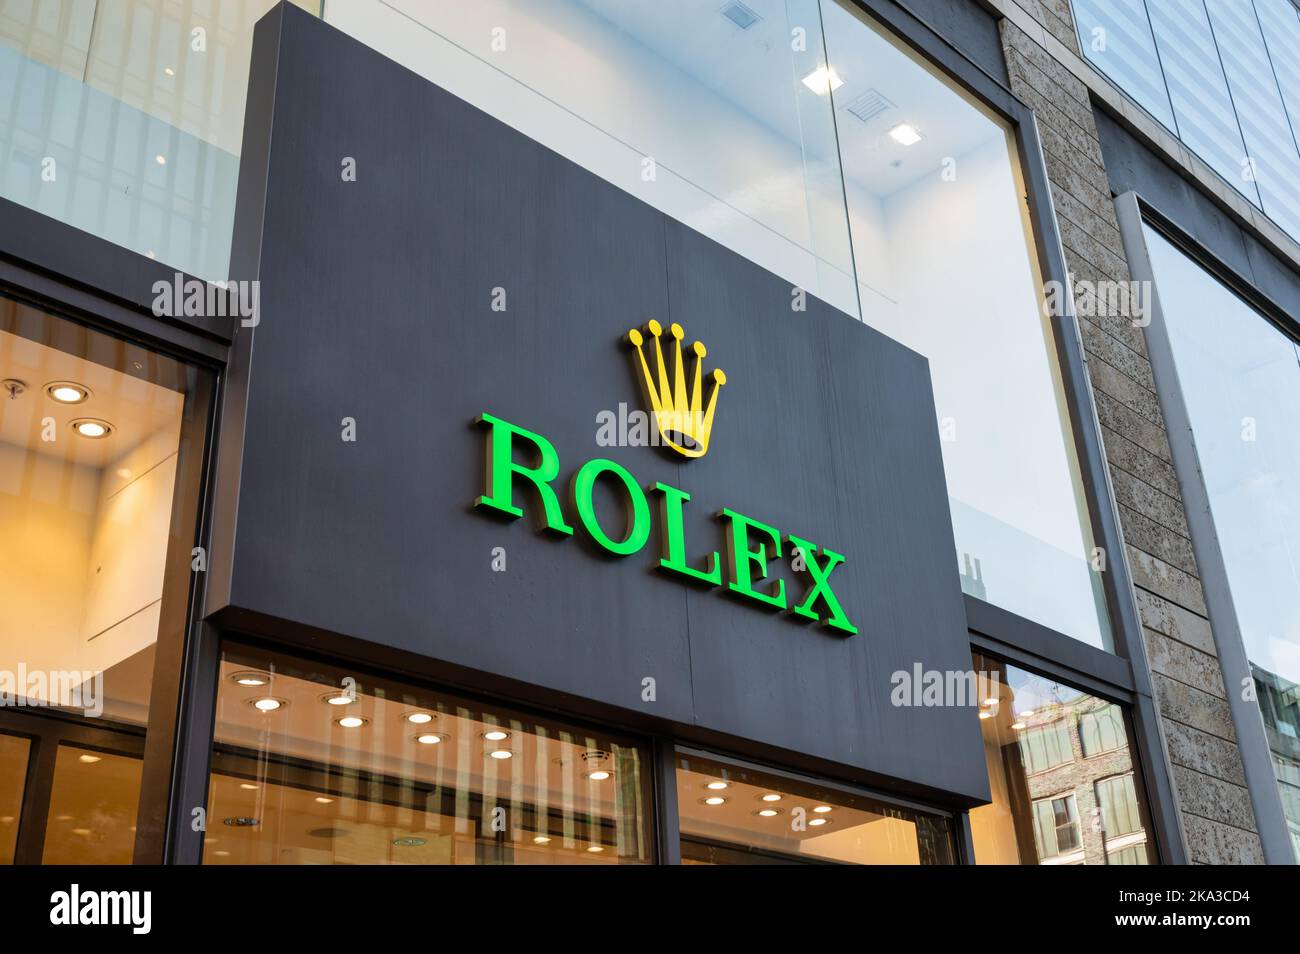 Liverpool, UK- Sept 7, 2022: The sign for the Rolex store in Liverpool England Stock Photo